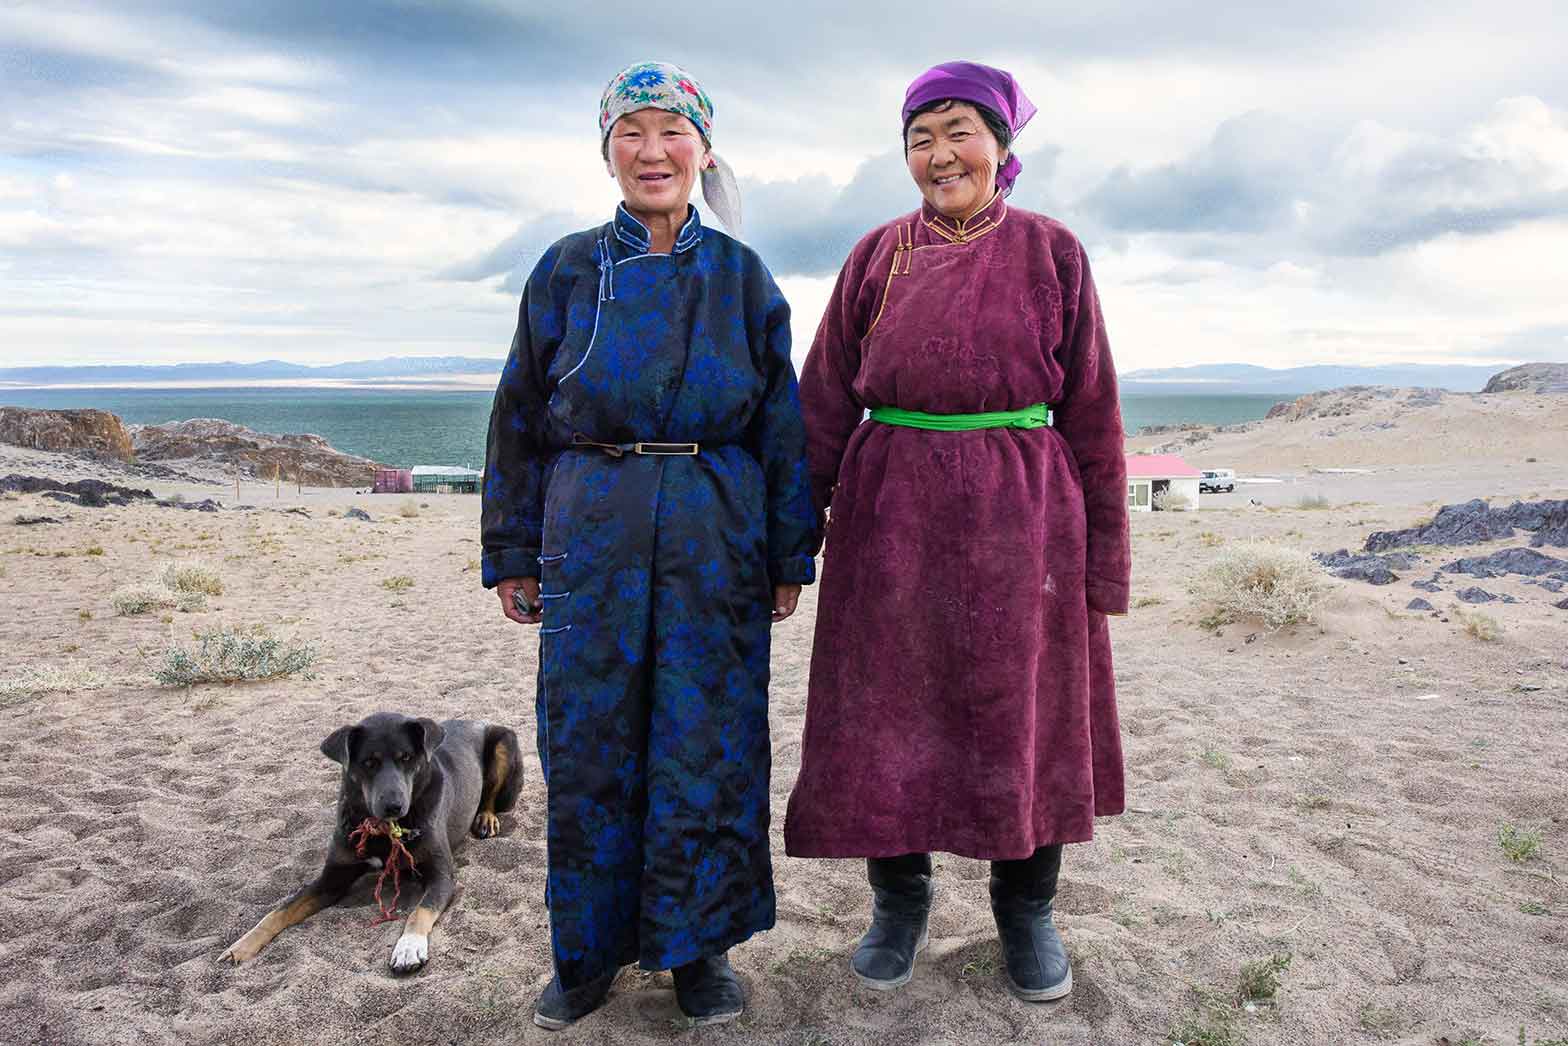 A surprise visit during breakfast in Mongolia